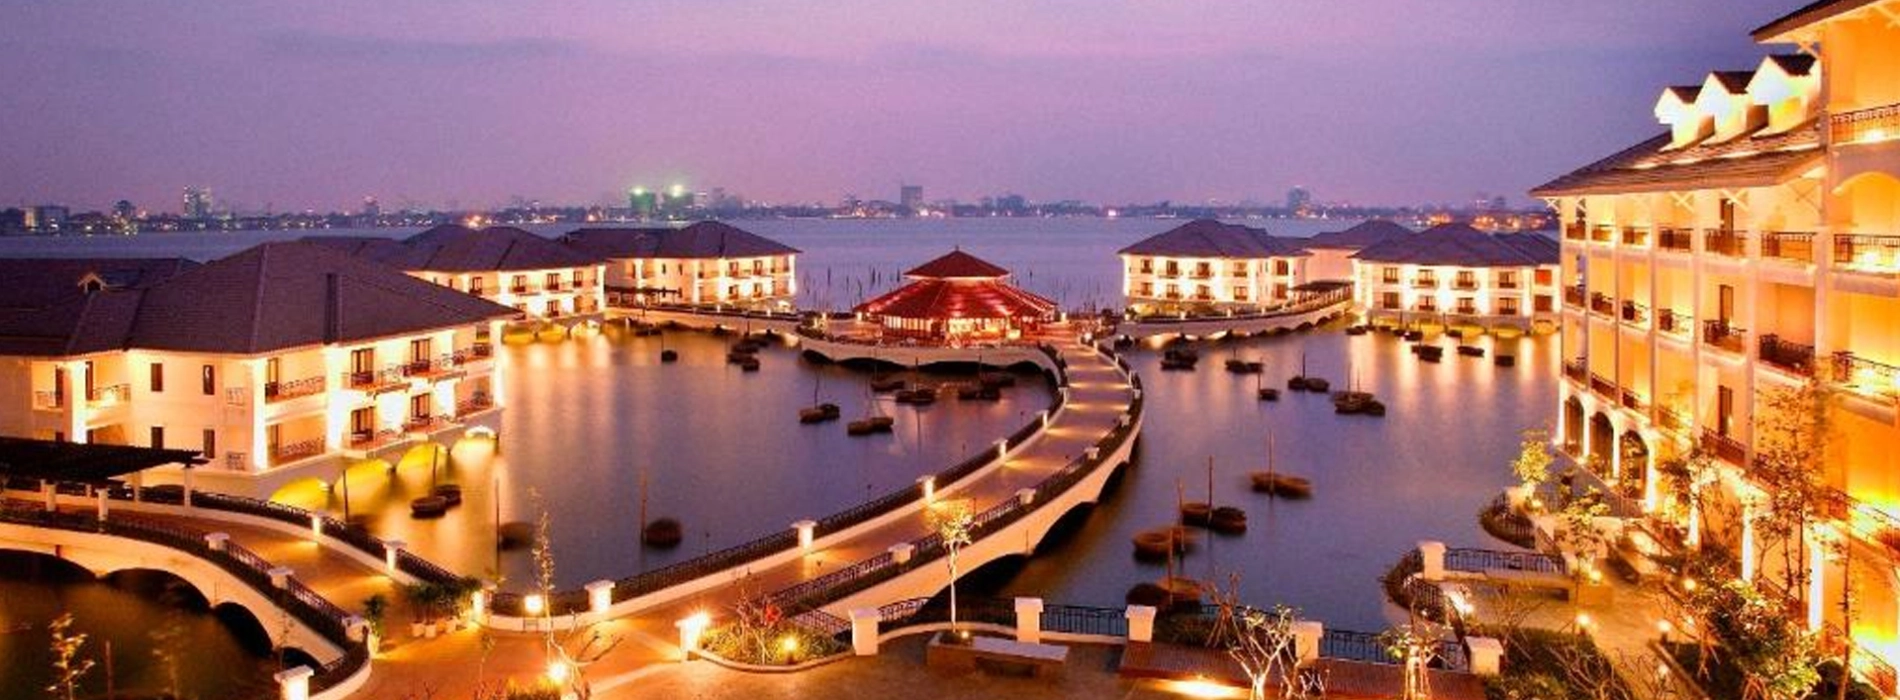 Hotels to stay in Hanoi